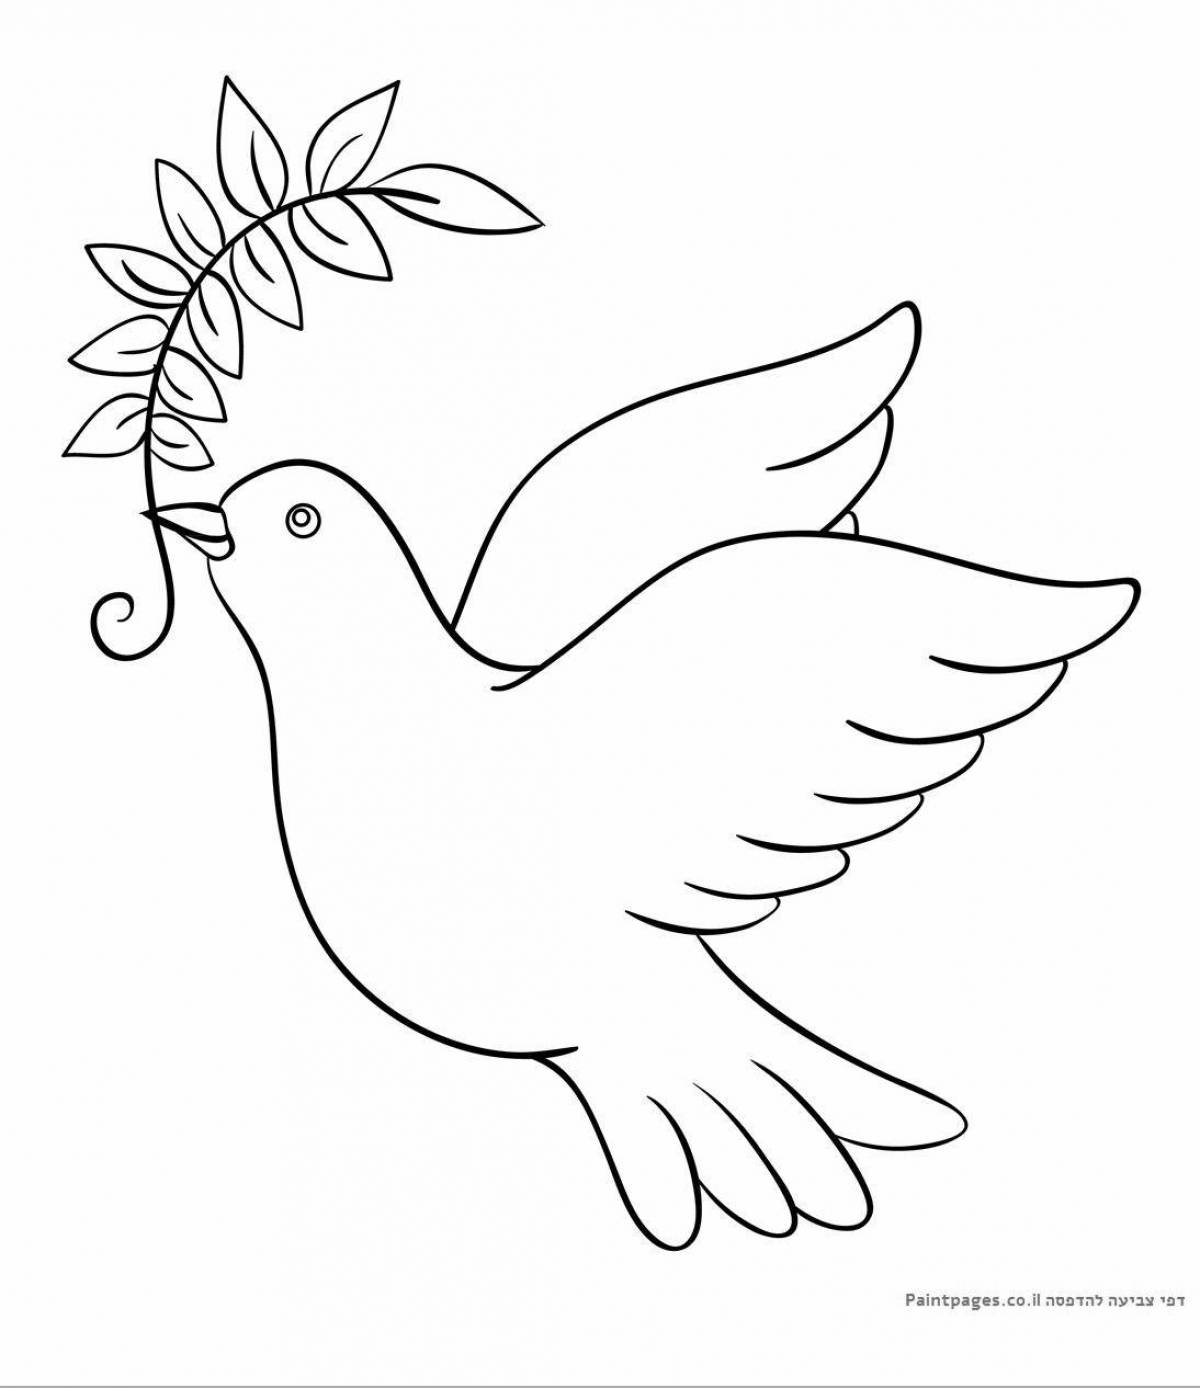 A wonderful dove of peace coloring book for kids